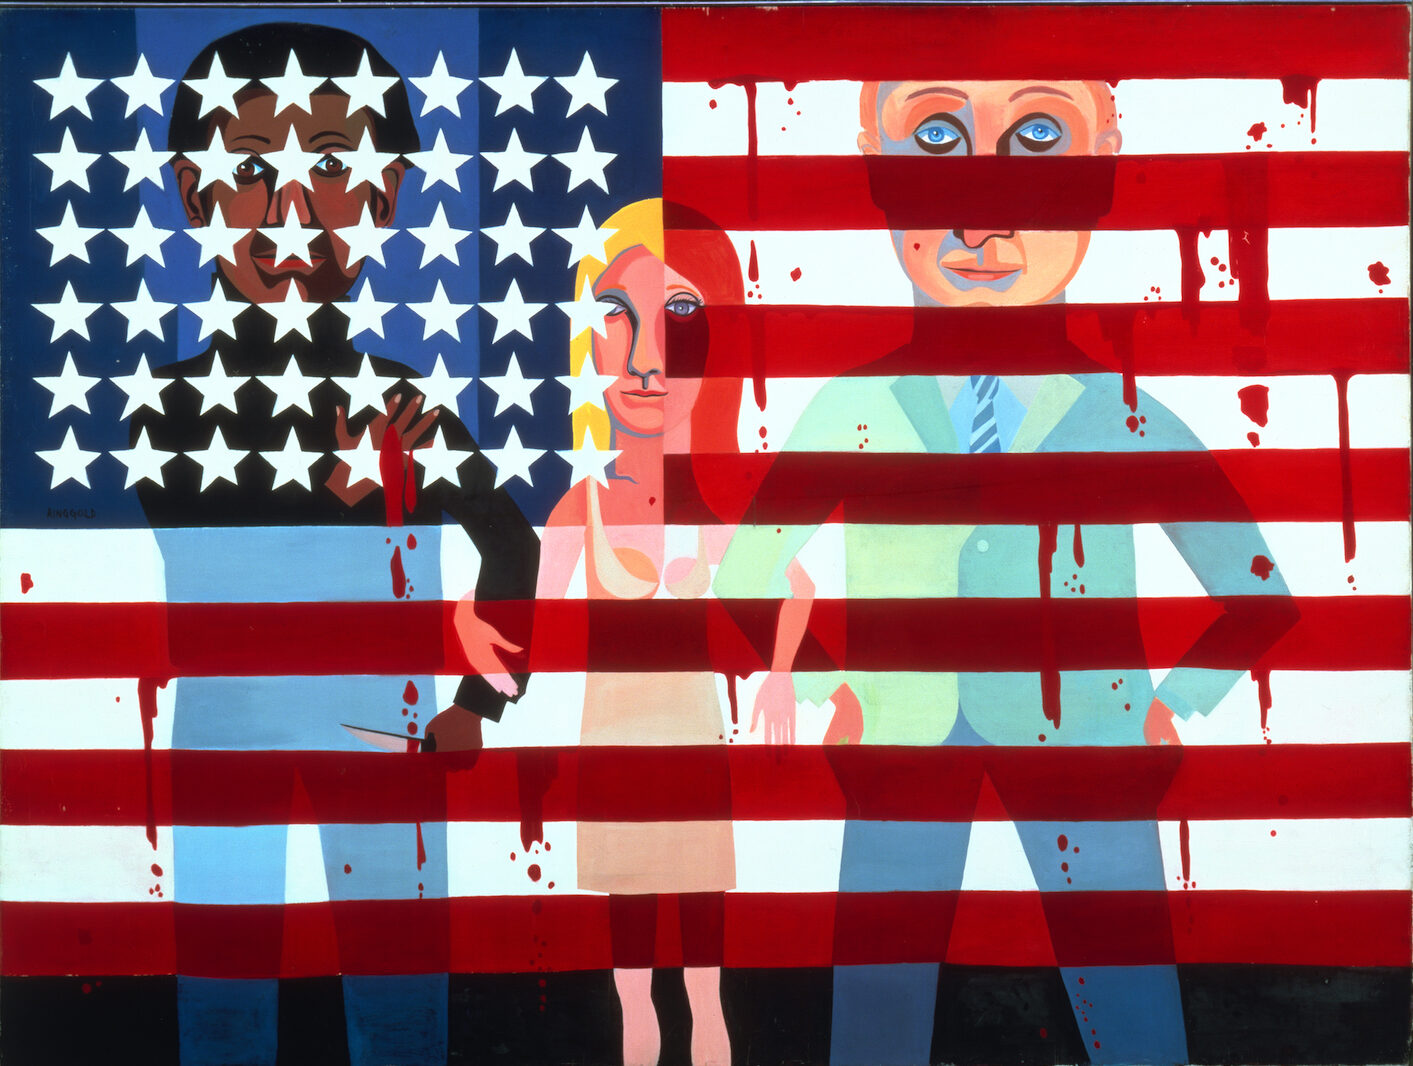 Semi-cubist painting of a black man, white woman, and white man linking arms, superimposed with the American flag. The black man, partially obscured by the stars on the flag, clutches his bleeding chest with one hand and holds a knife in the other. The red stripes of the flag drip as if bleeding.